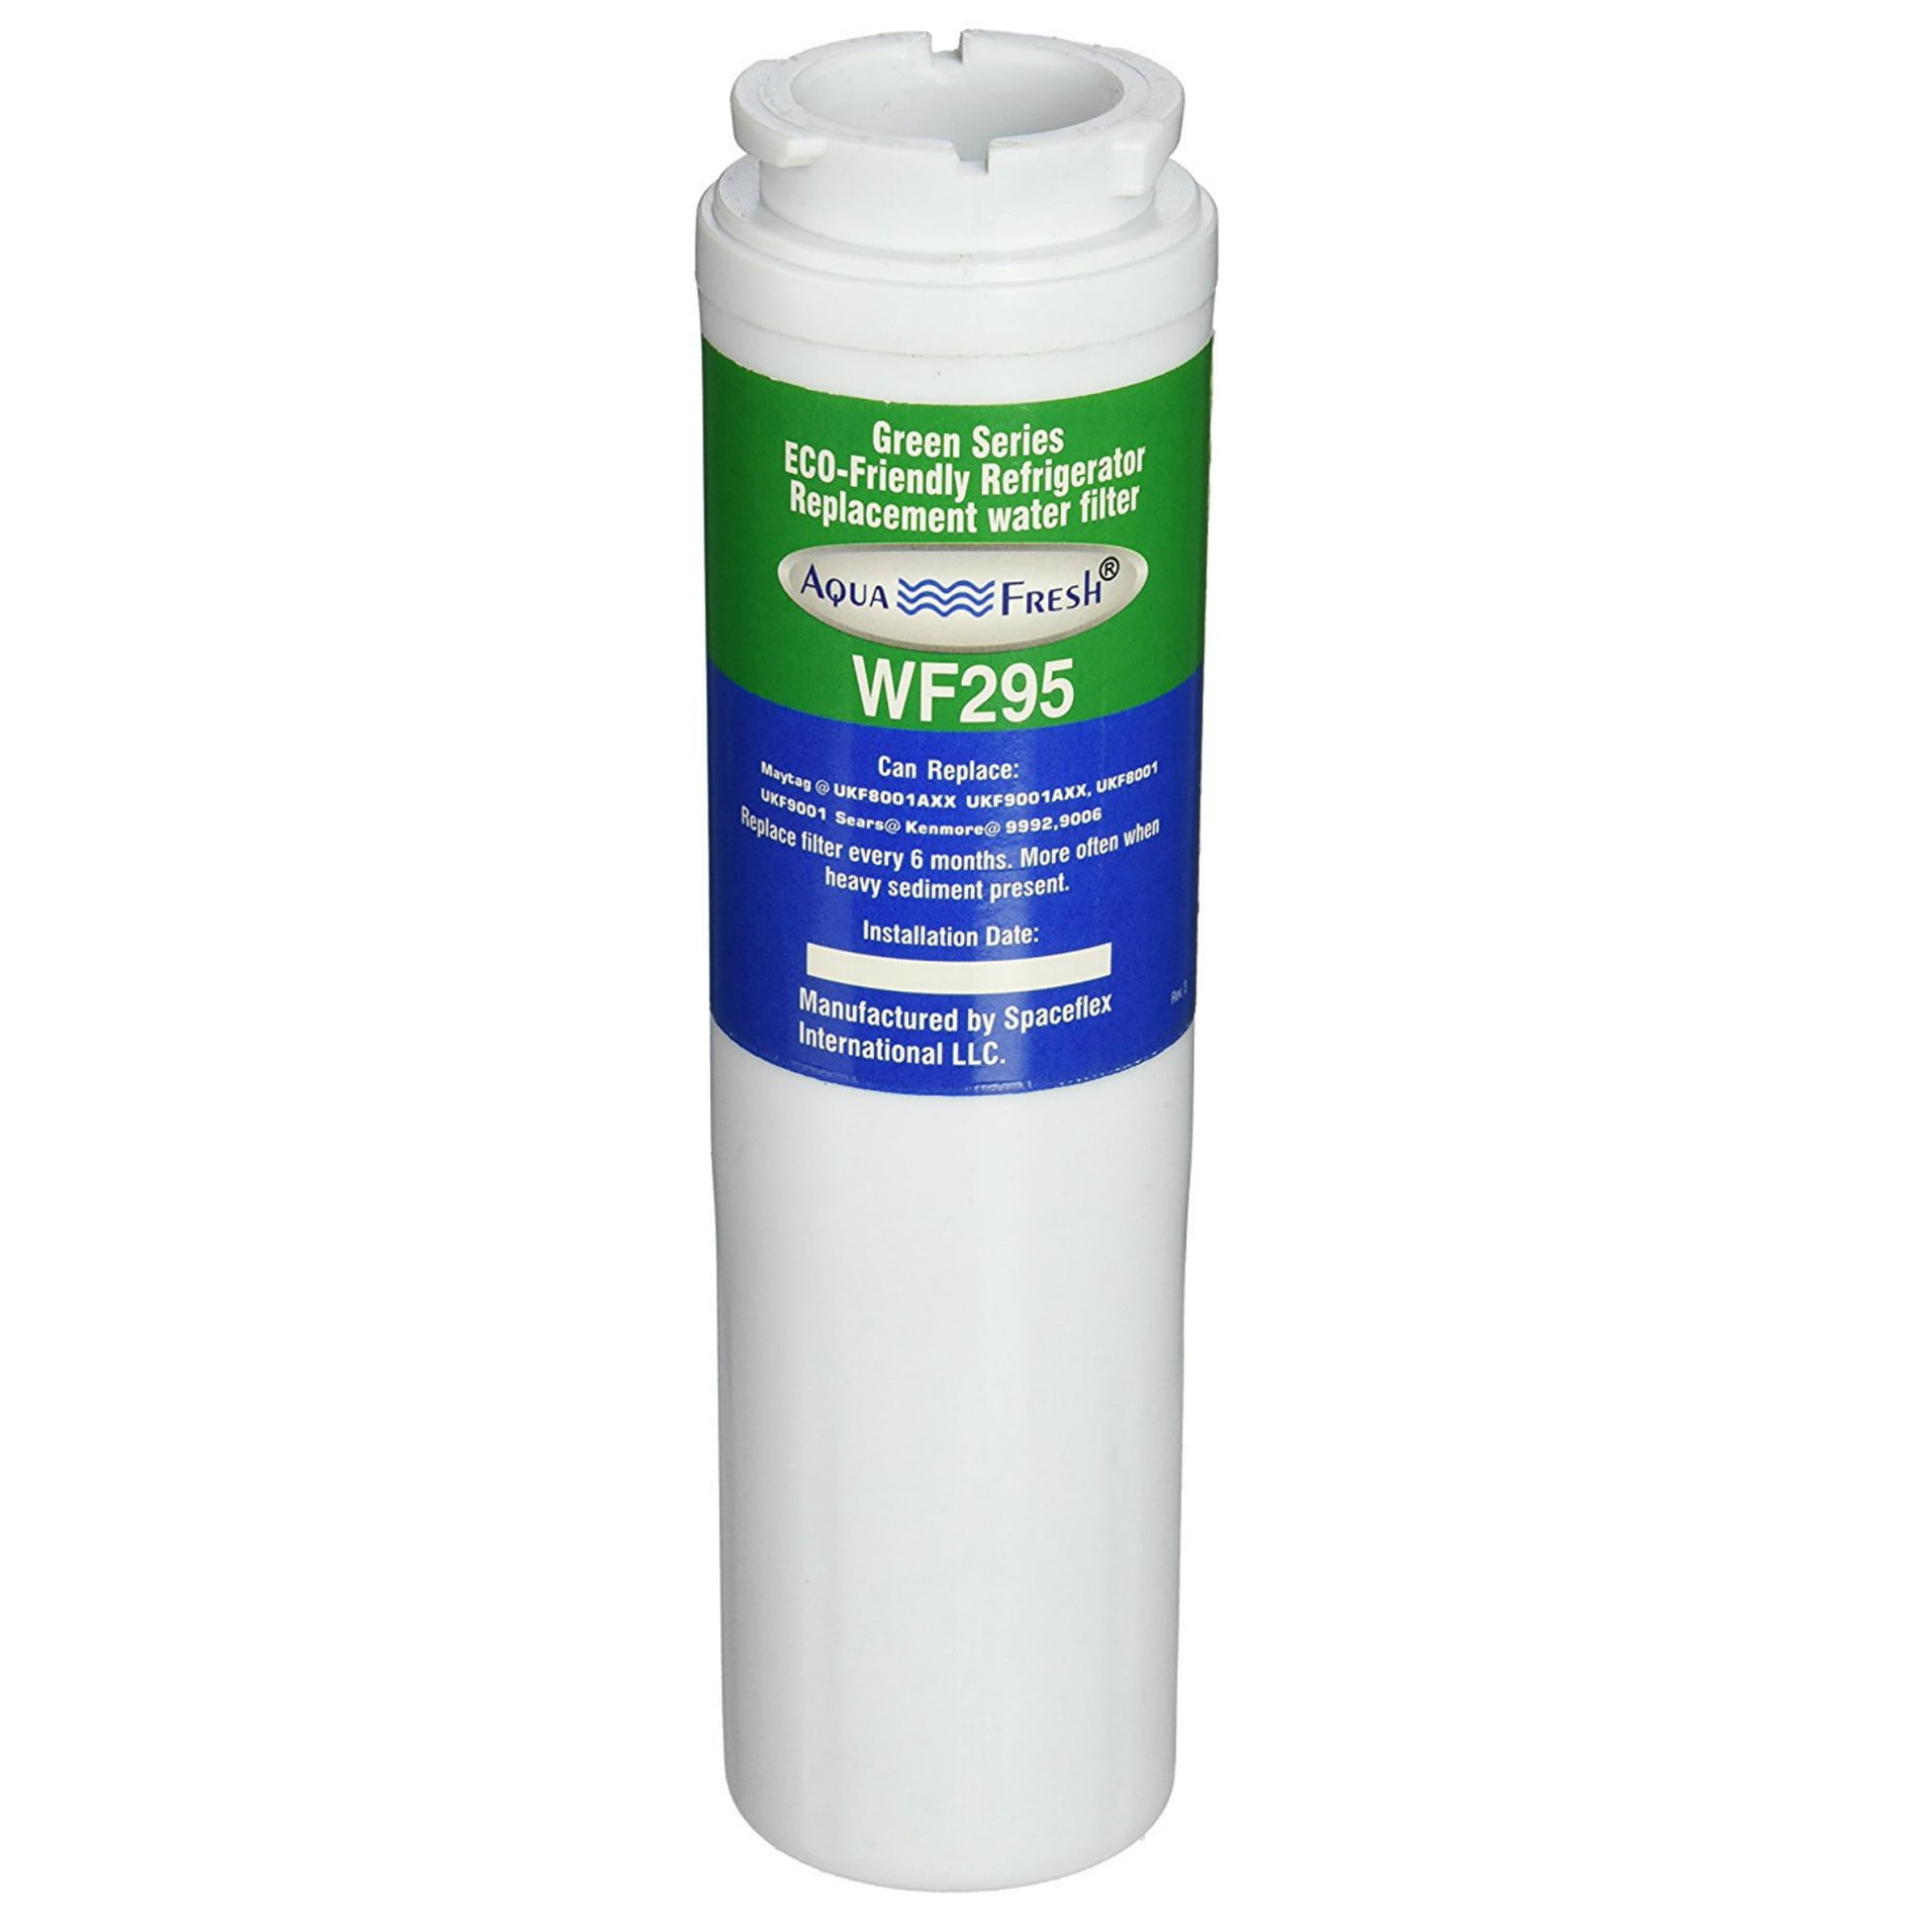 2 Pack Refrigerator water filter Replacement for Jenn-Air UKF8001AXX-750 